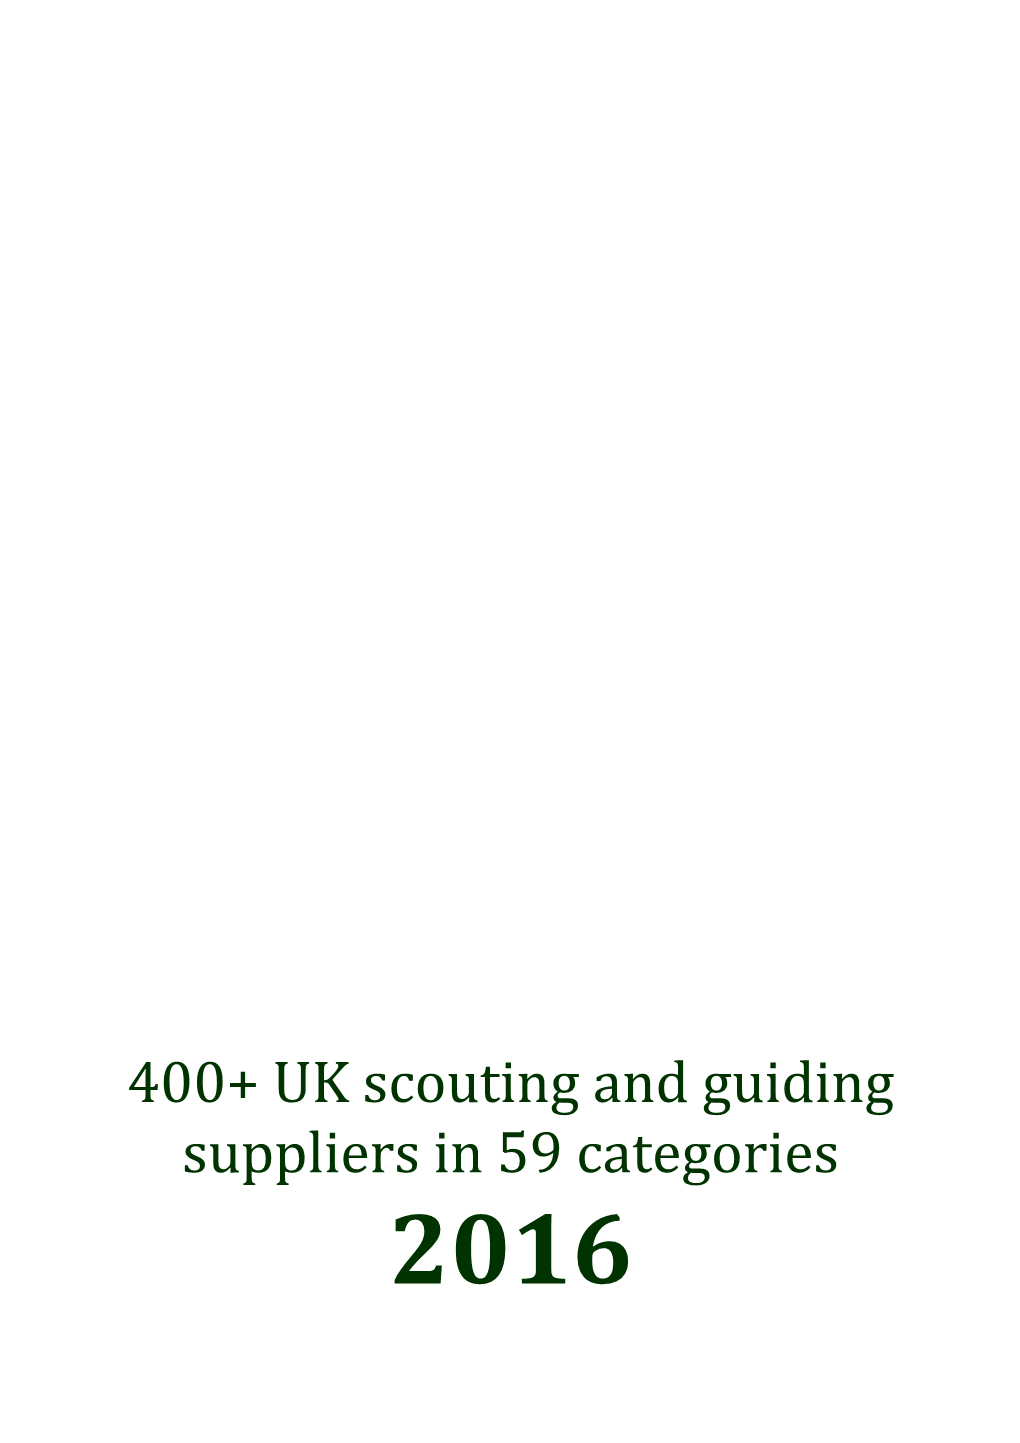 400+ UK Scouting and Guiding Suppliers in 59 Categories